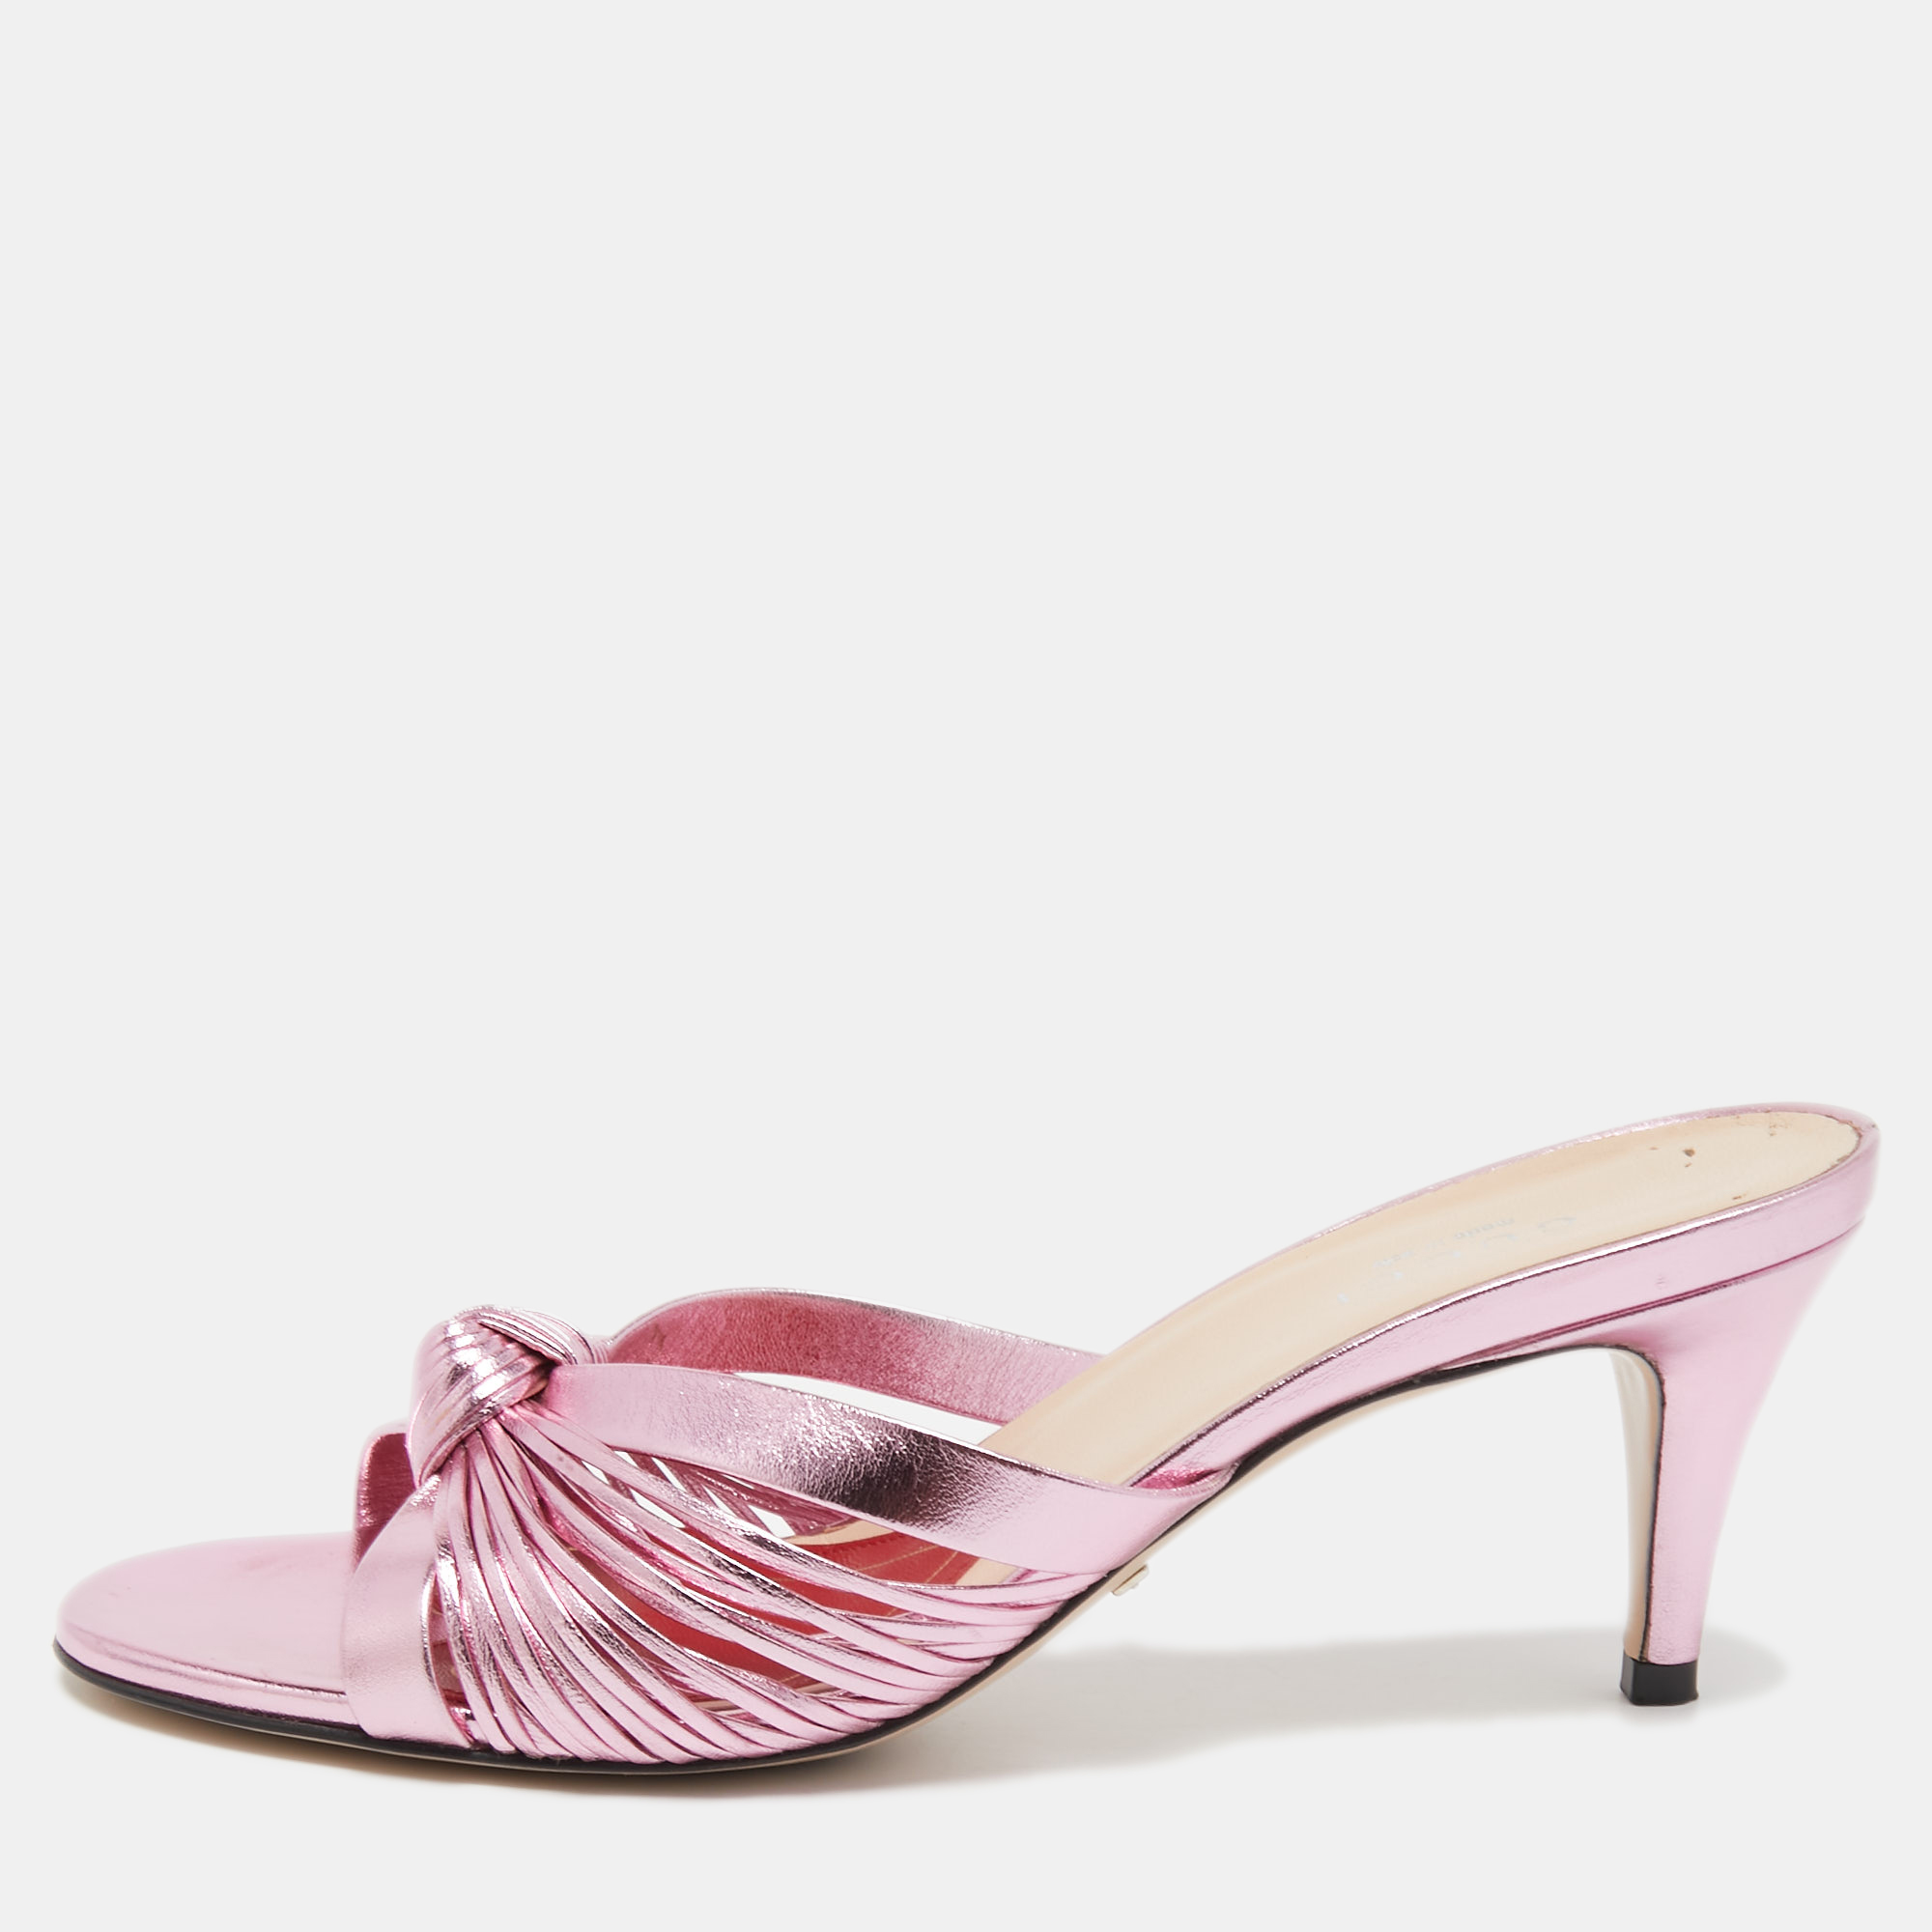 Pre-owned Gucci Metallic Pink Leather Knotted Slide Sandals Size 36.5